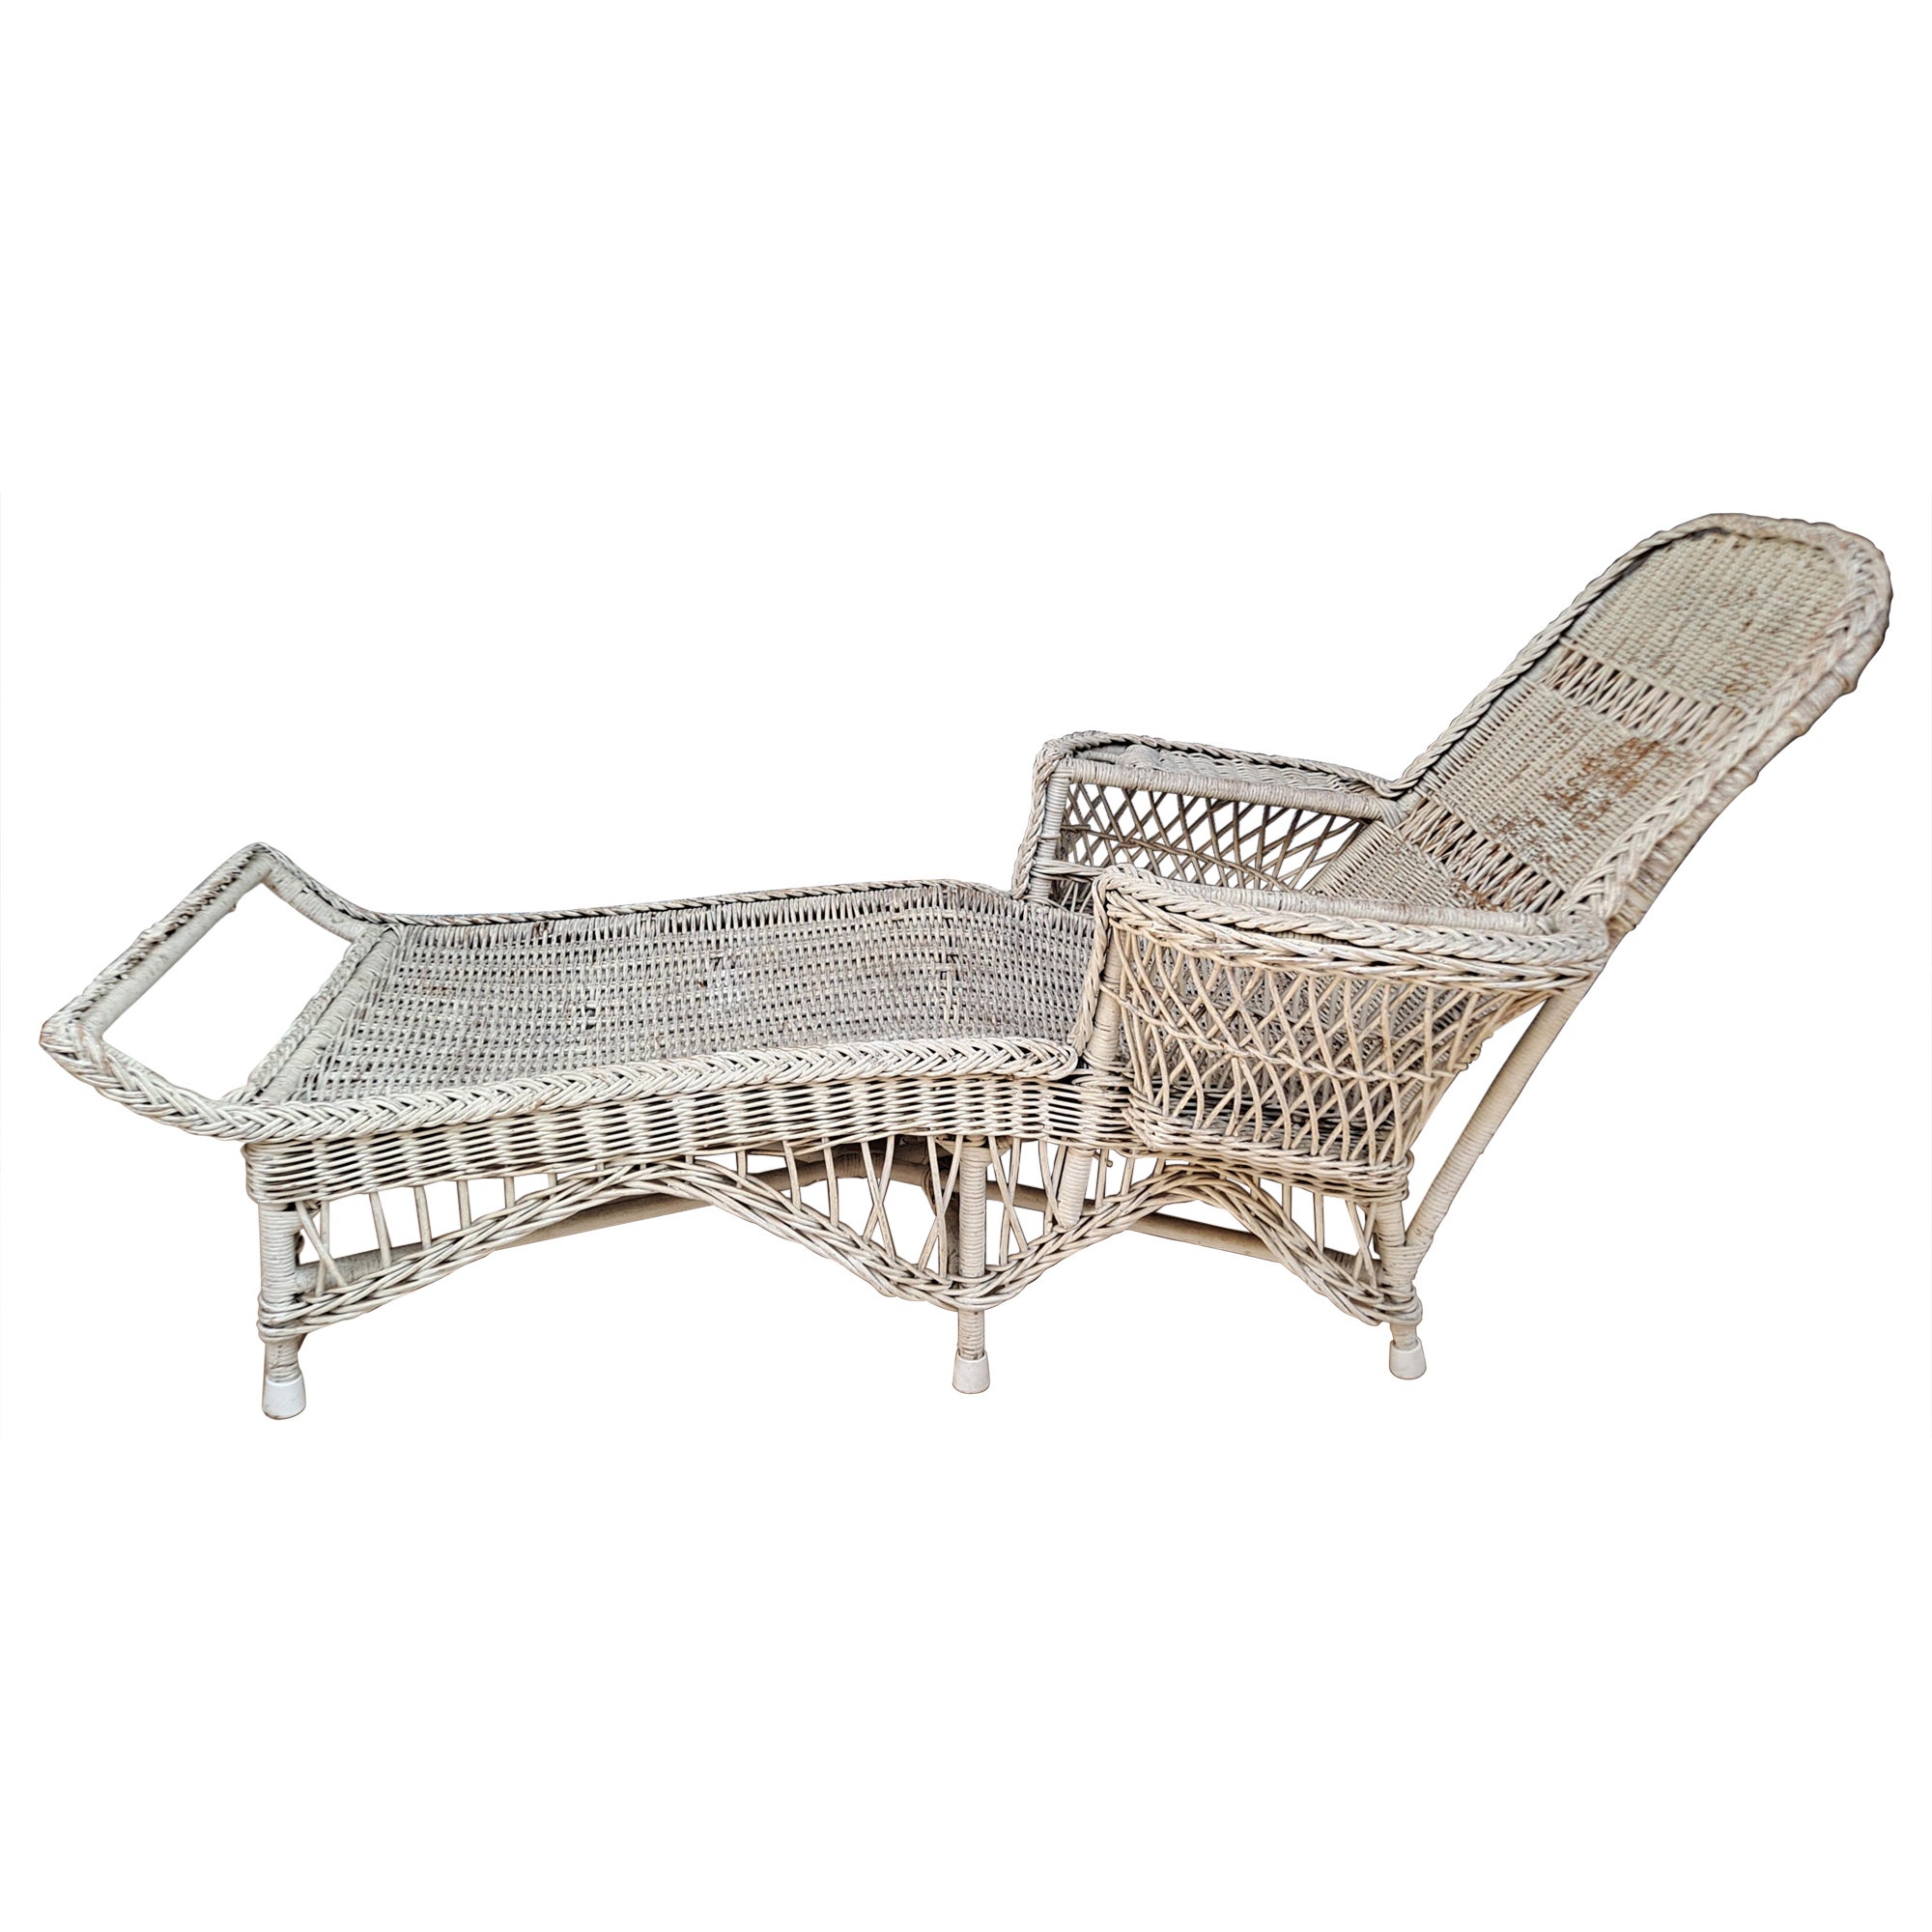 1920's White Wicker Chaise Lounge For Sale